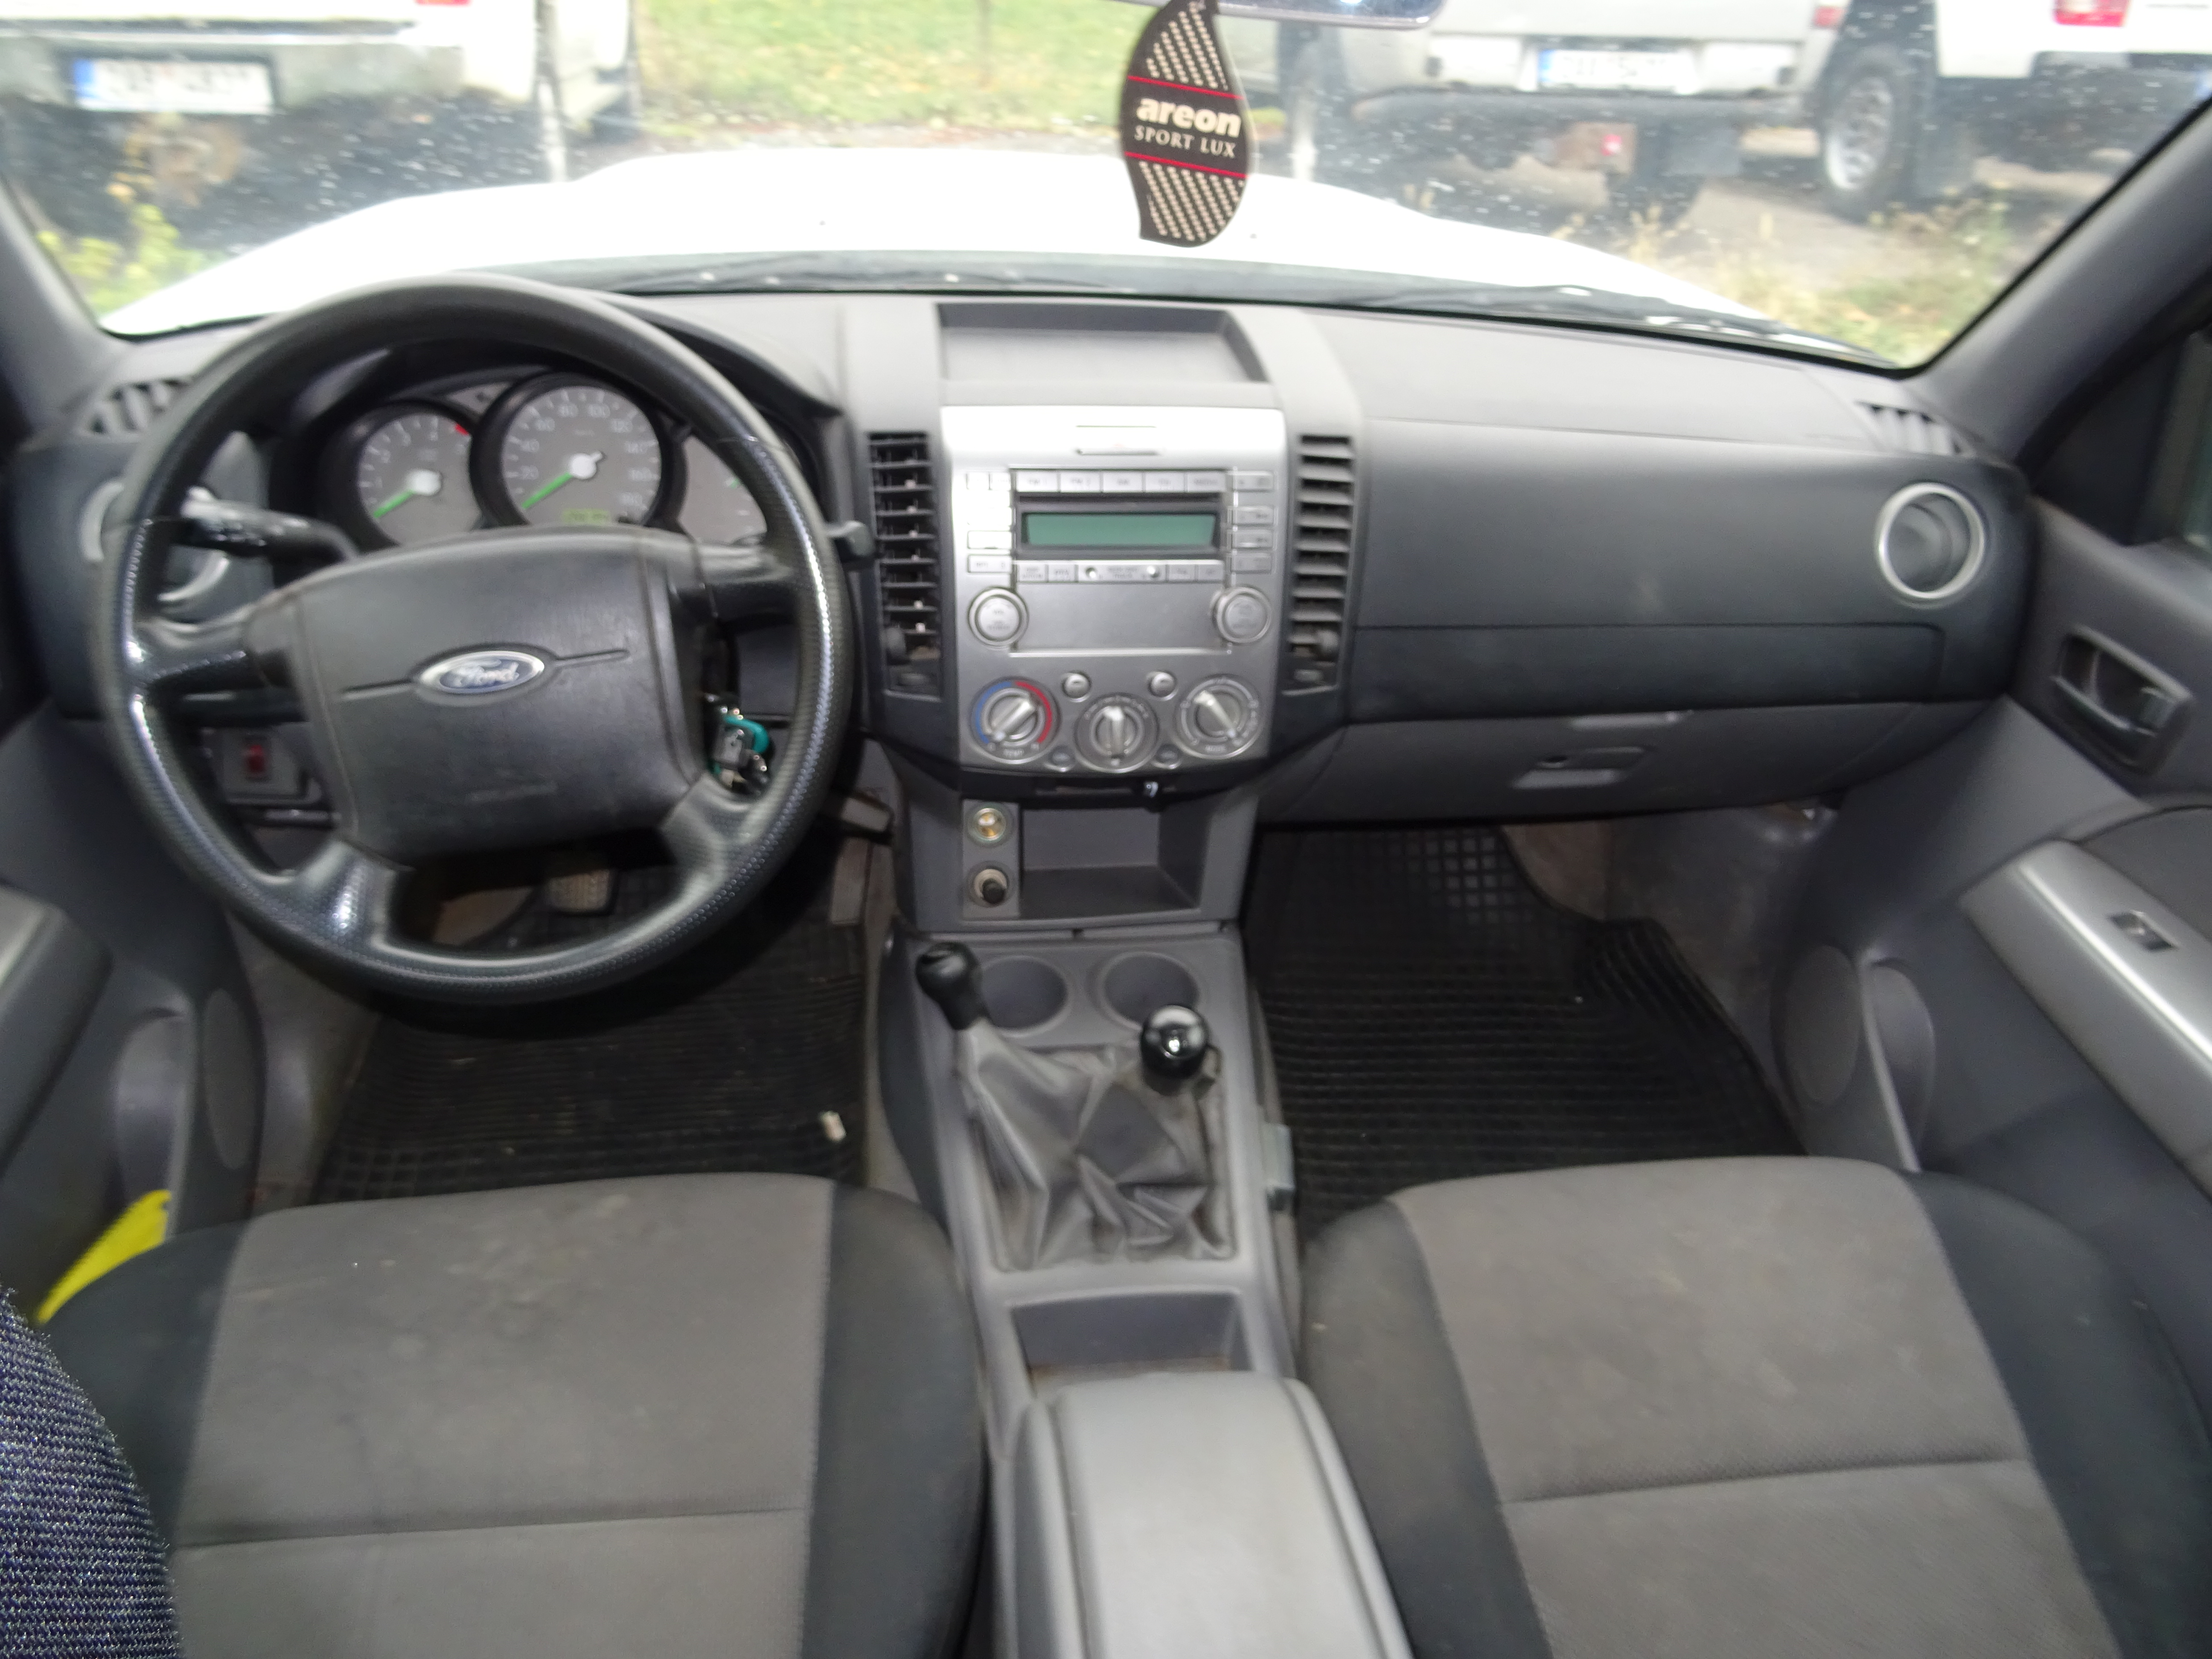 Ford Ranger Double cab 2.5 4x4 (6.) - foto 6